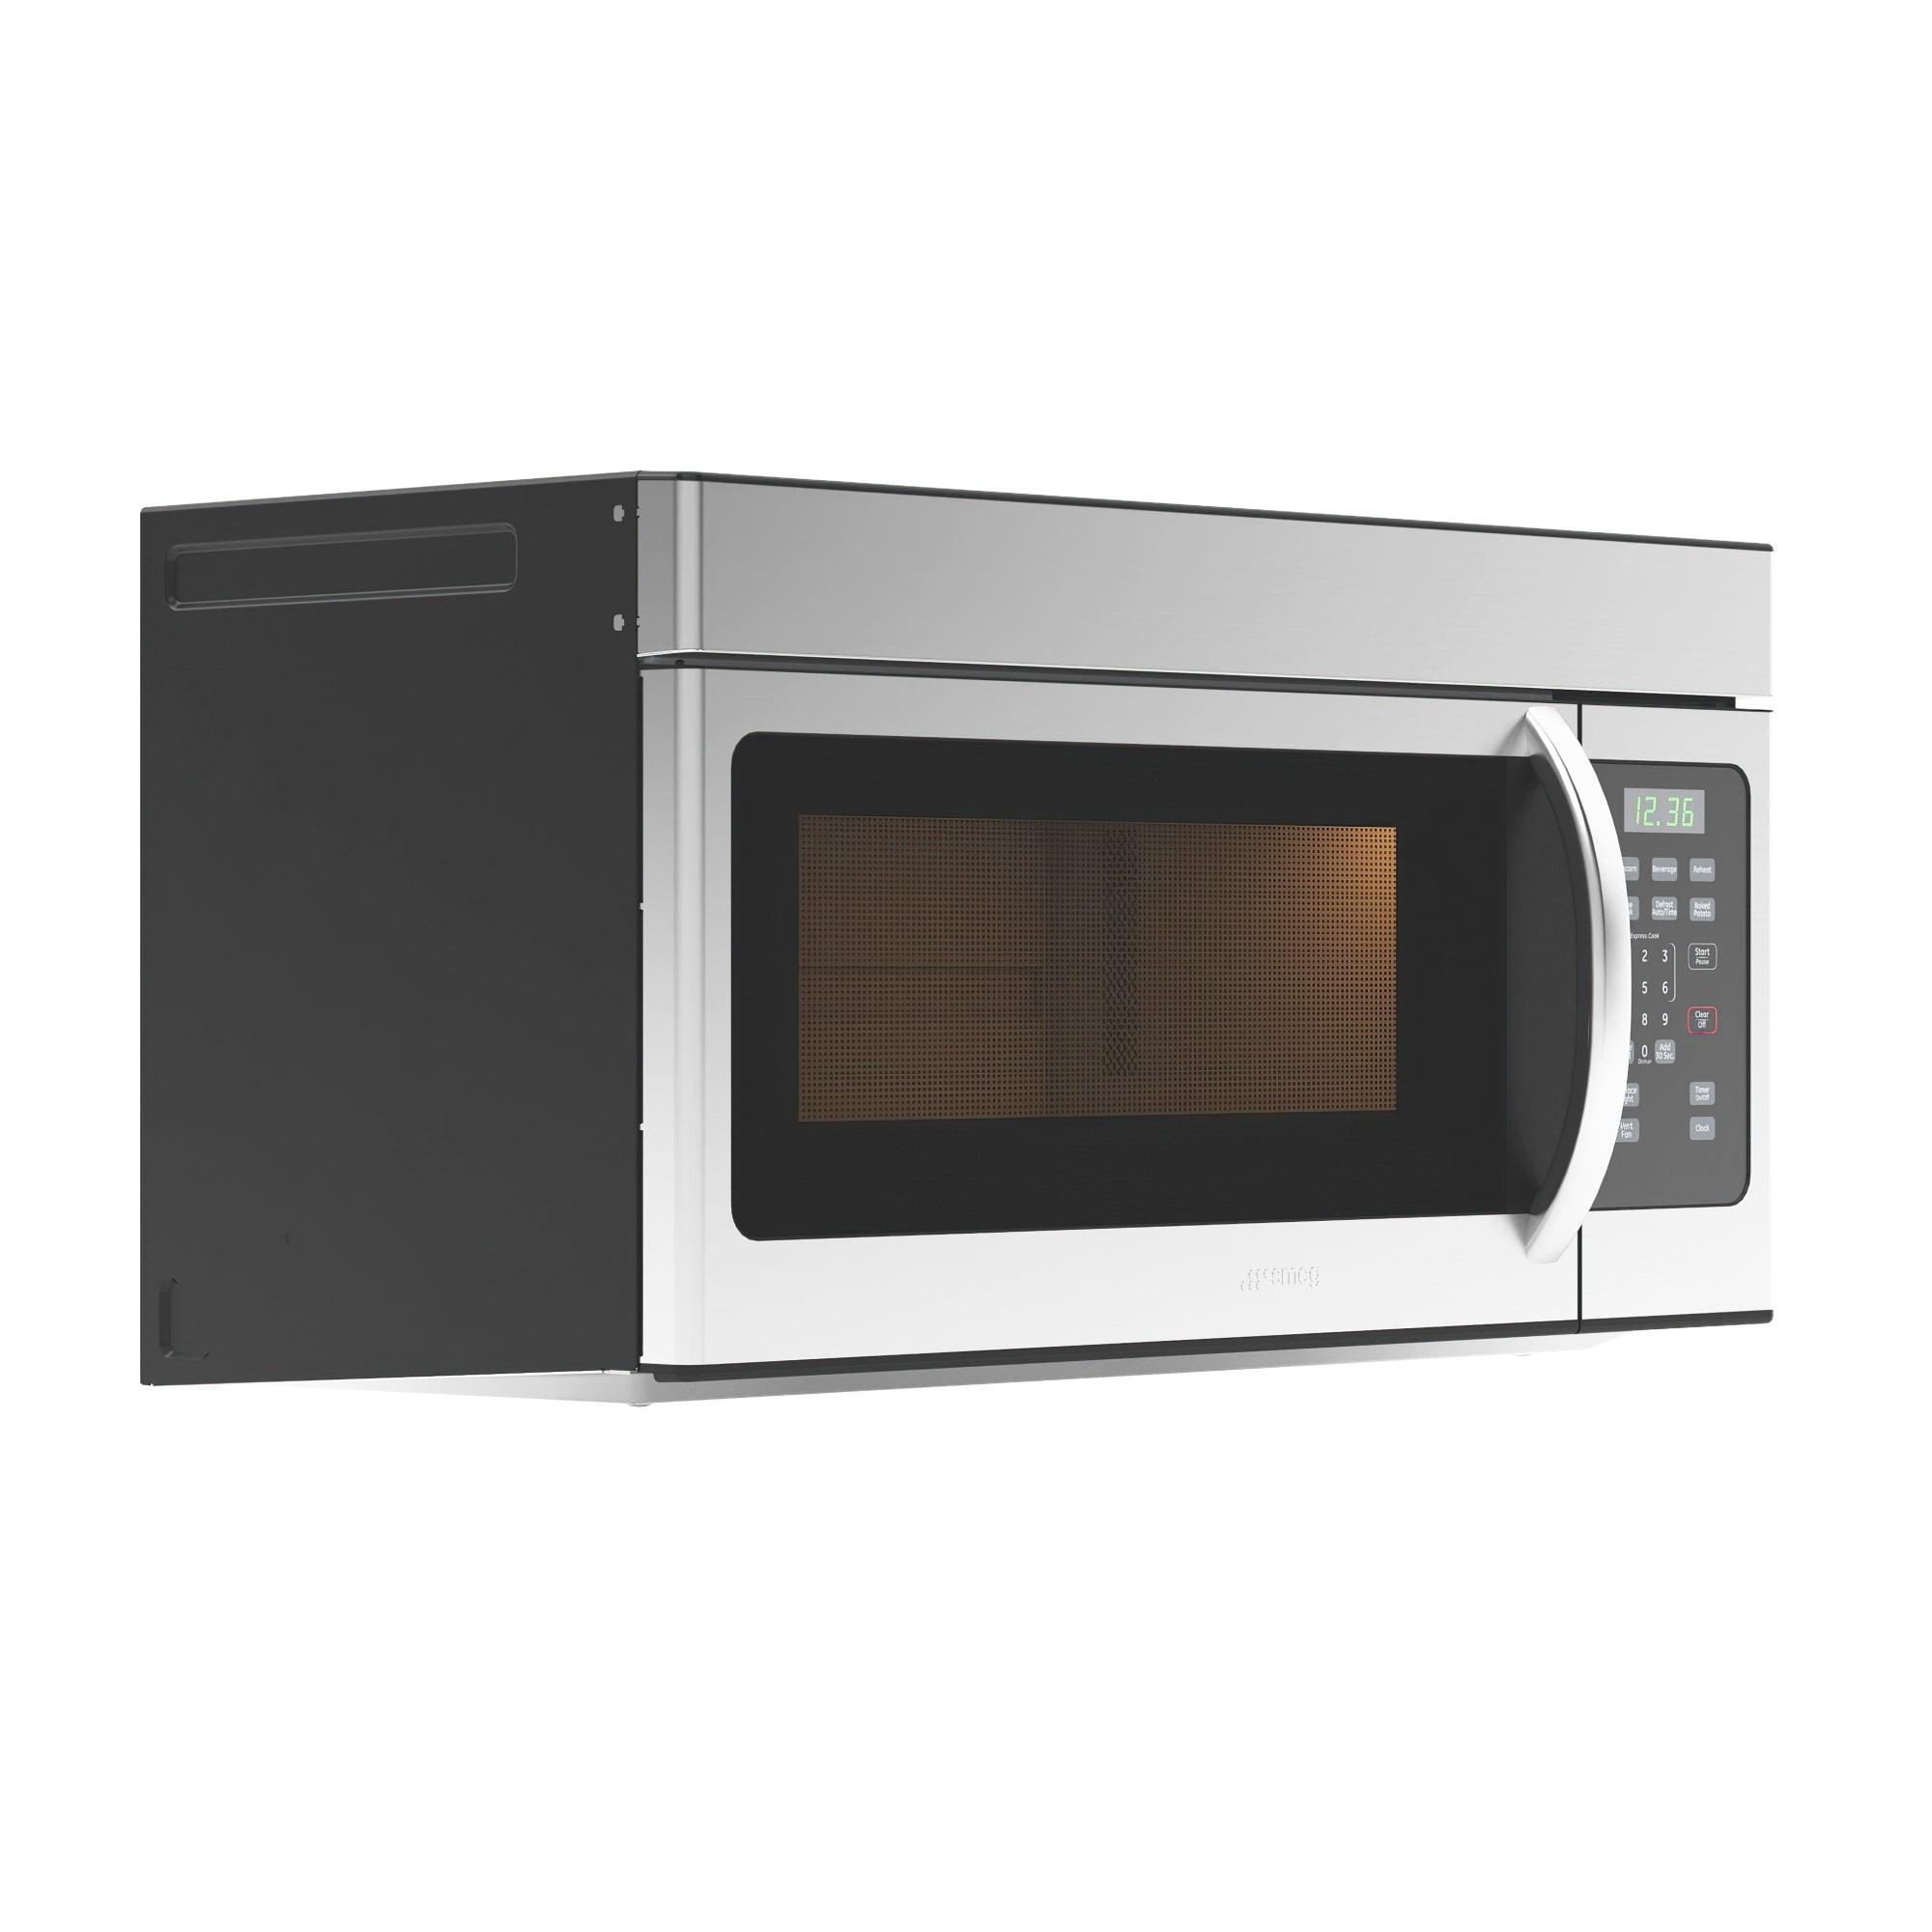 1.6 cu. ft. Over the Range Stainless Steel Microwave, KM-MOT-1SS. - - VirtuousWares:Global